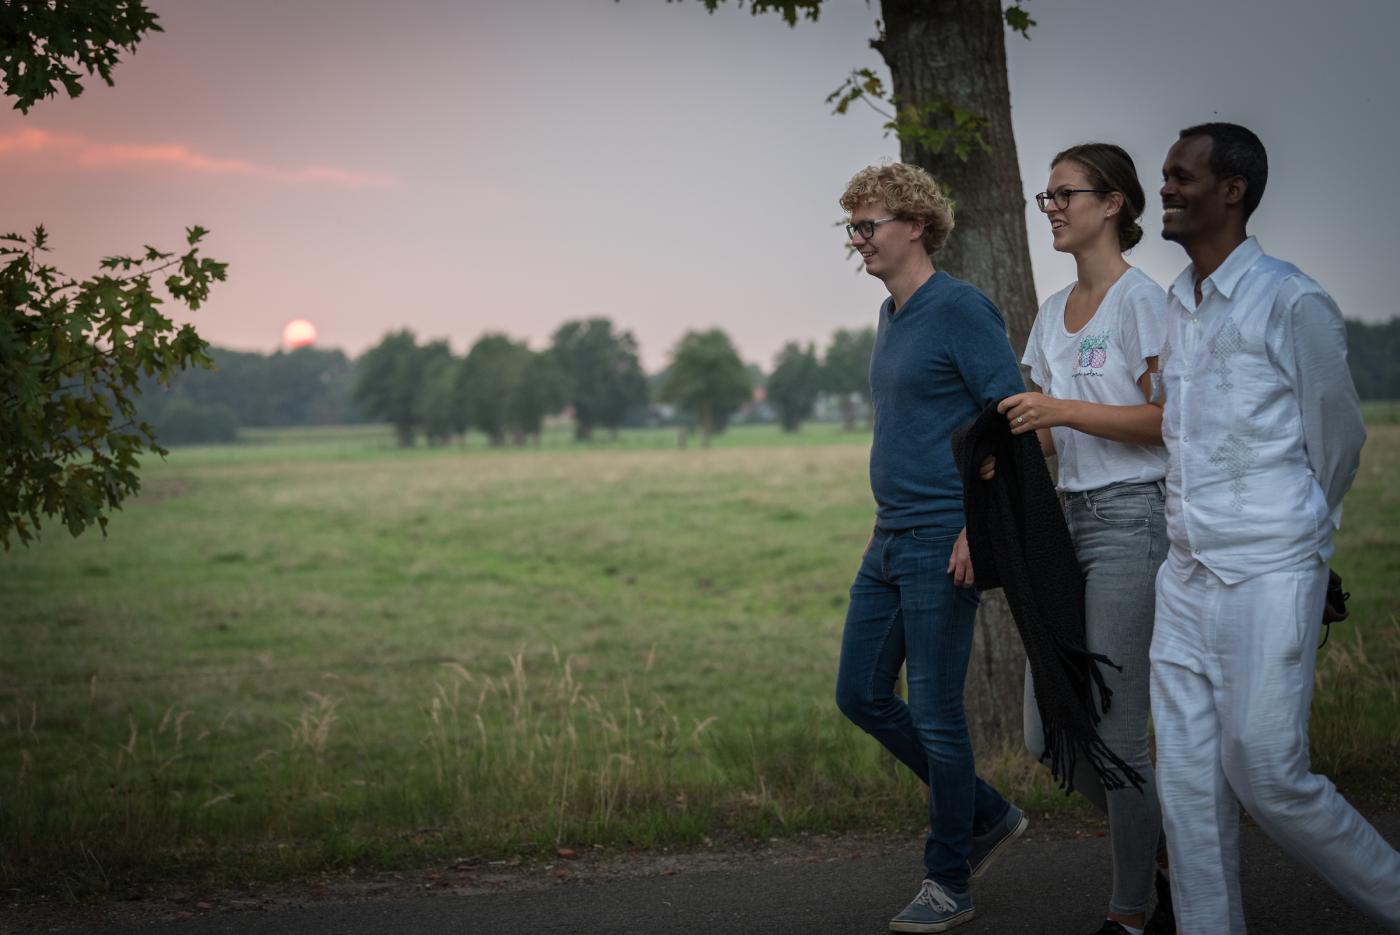 Youth Pilgrimage in the Netherlands on 21-23 August 2018